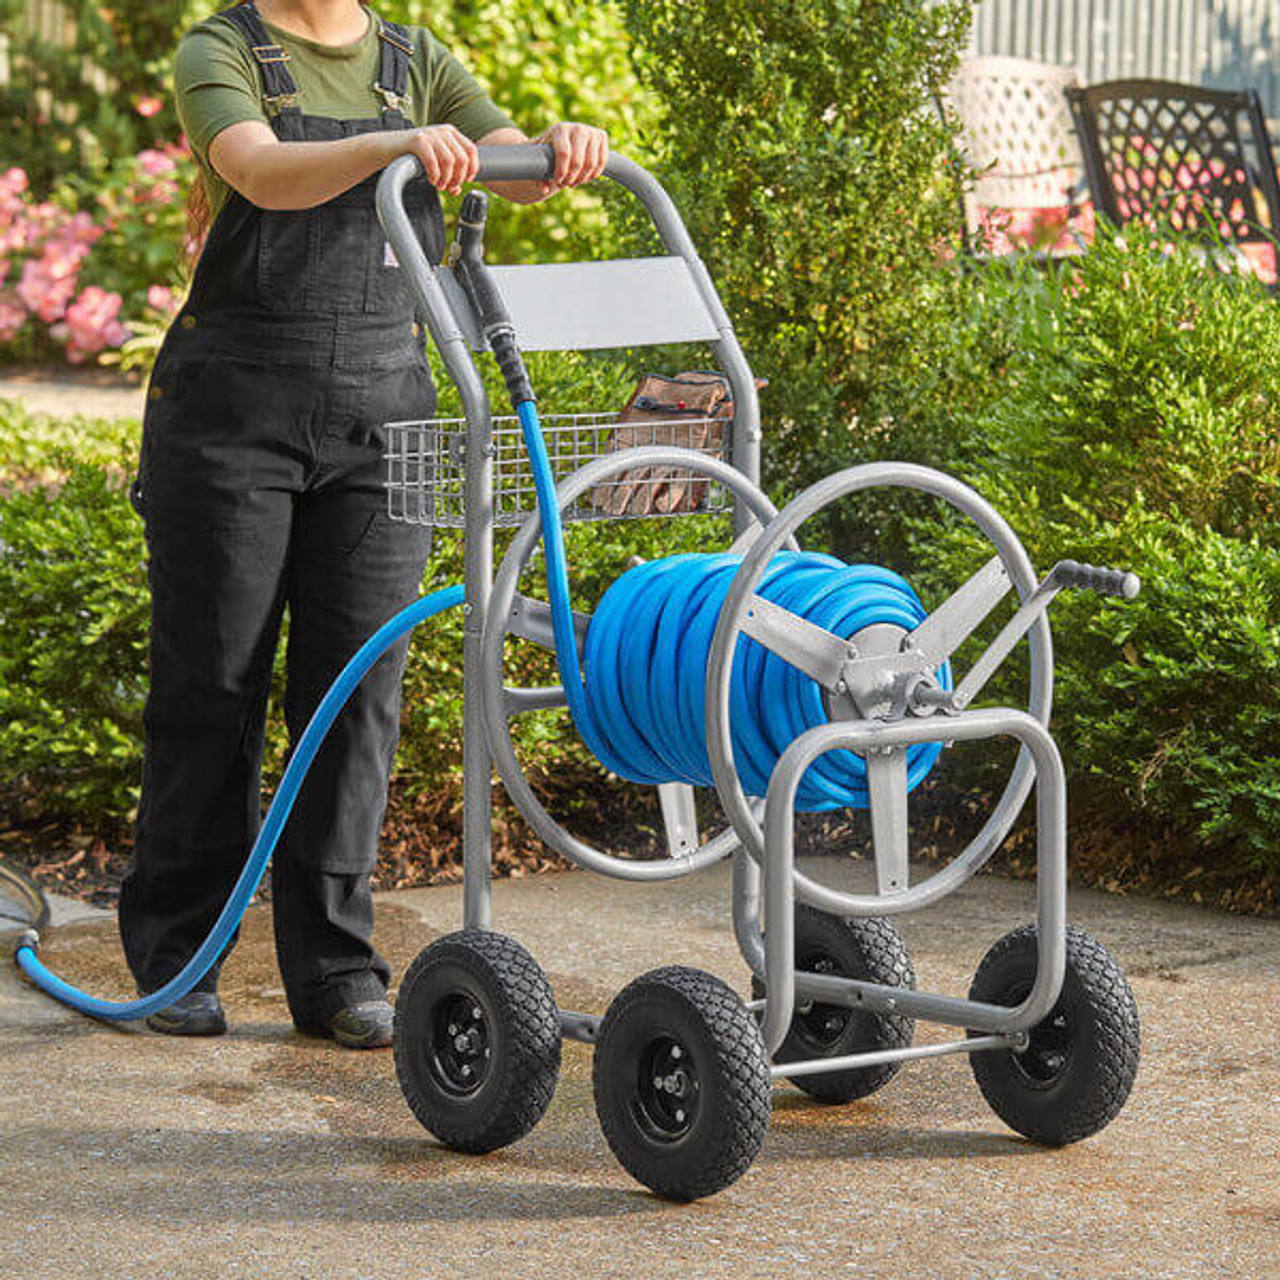 https://cdn11.bigcommerce.com/s-g5ygv2at8j/images/stencil/1280x1280/products/14971/31636/chicken-pieces-industrial-grade-garden-hose-reel-cart-for-effortless-lawn-and-garden-maintenance__03470.1689645233.jpg?c=1